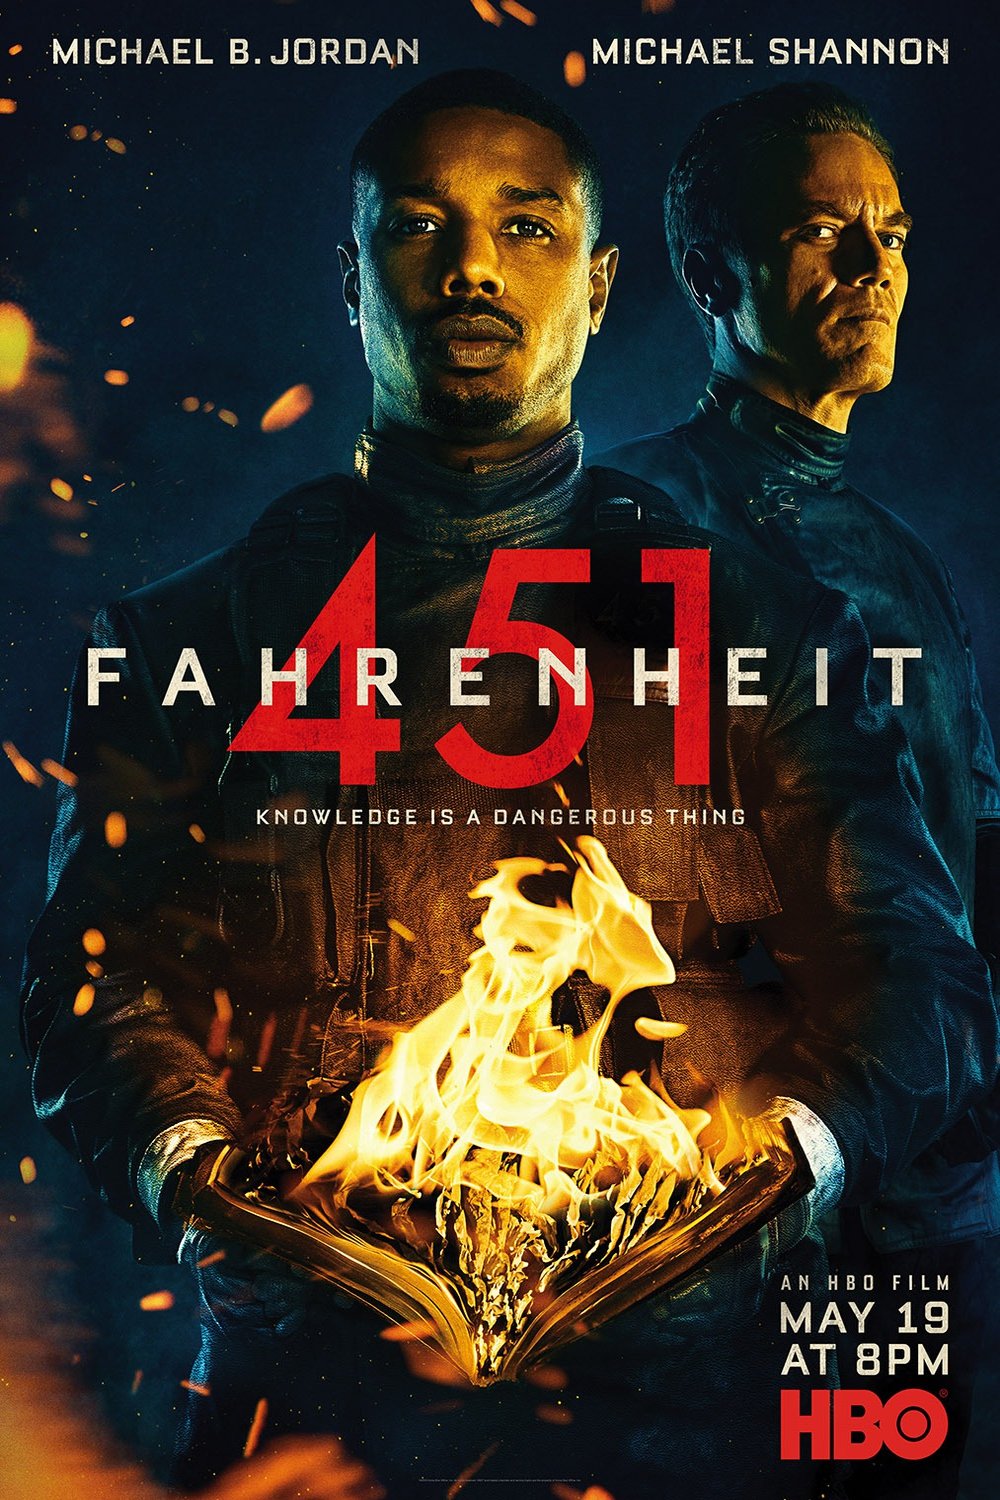 Poster of the movie Fahrenheit 451